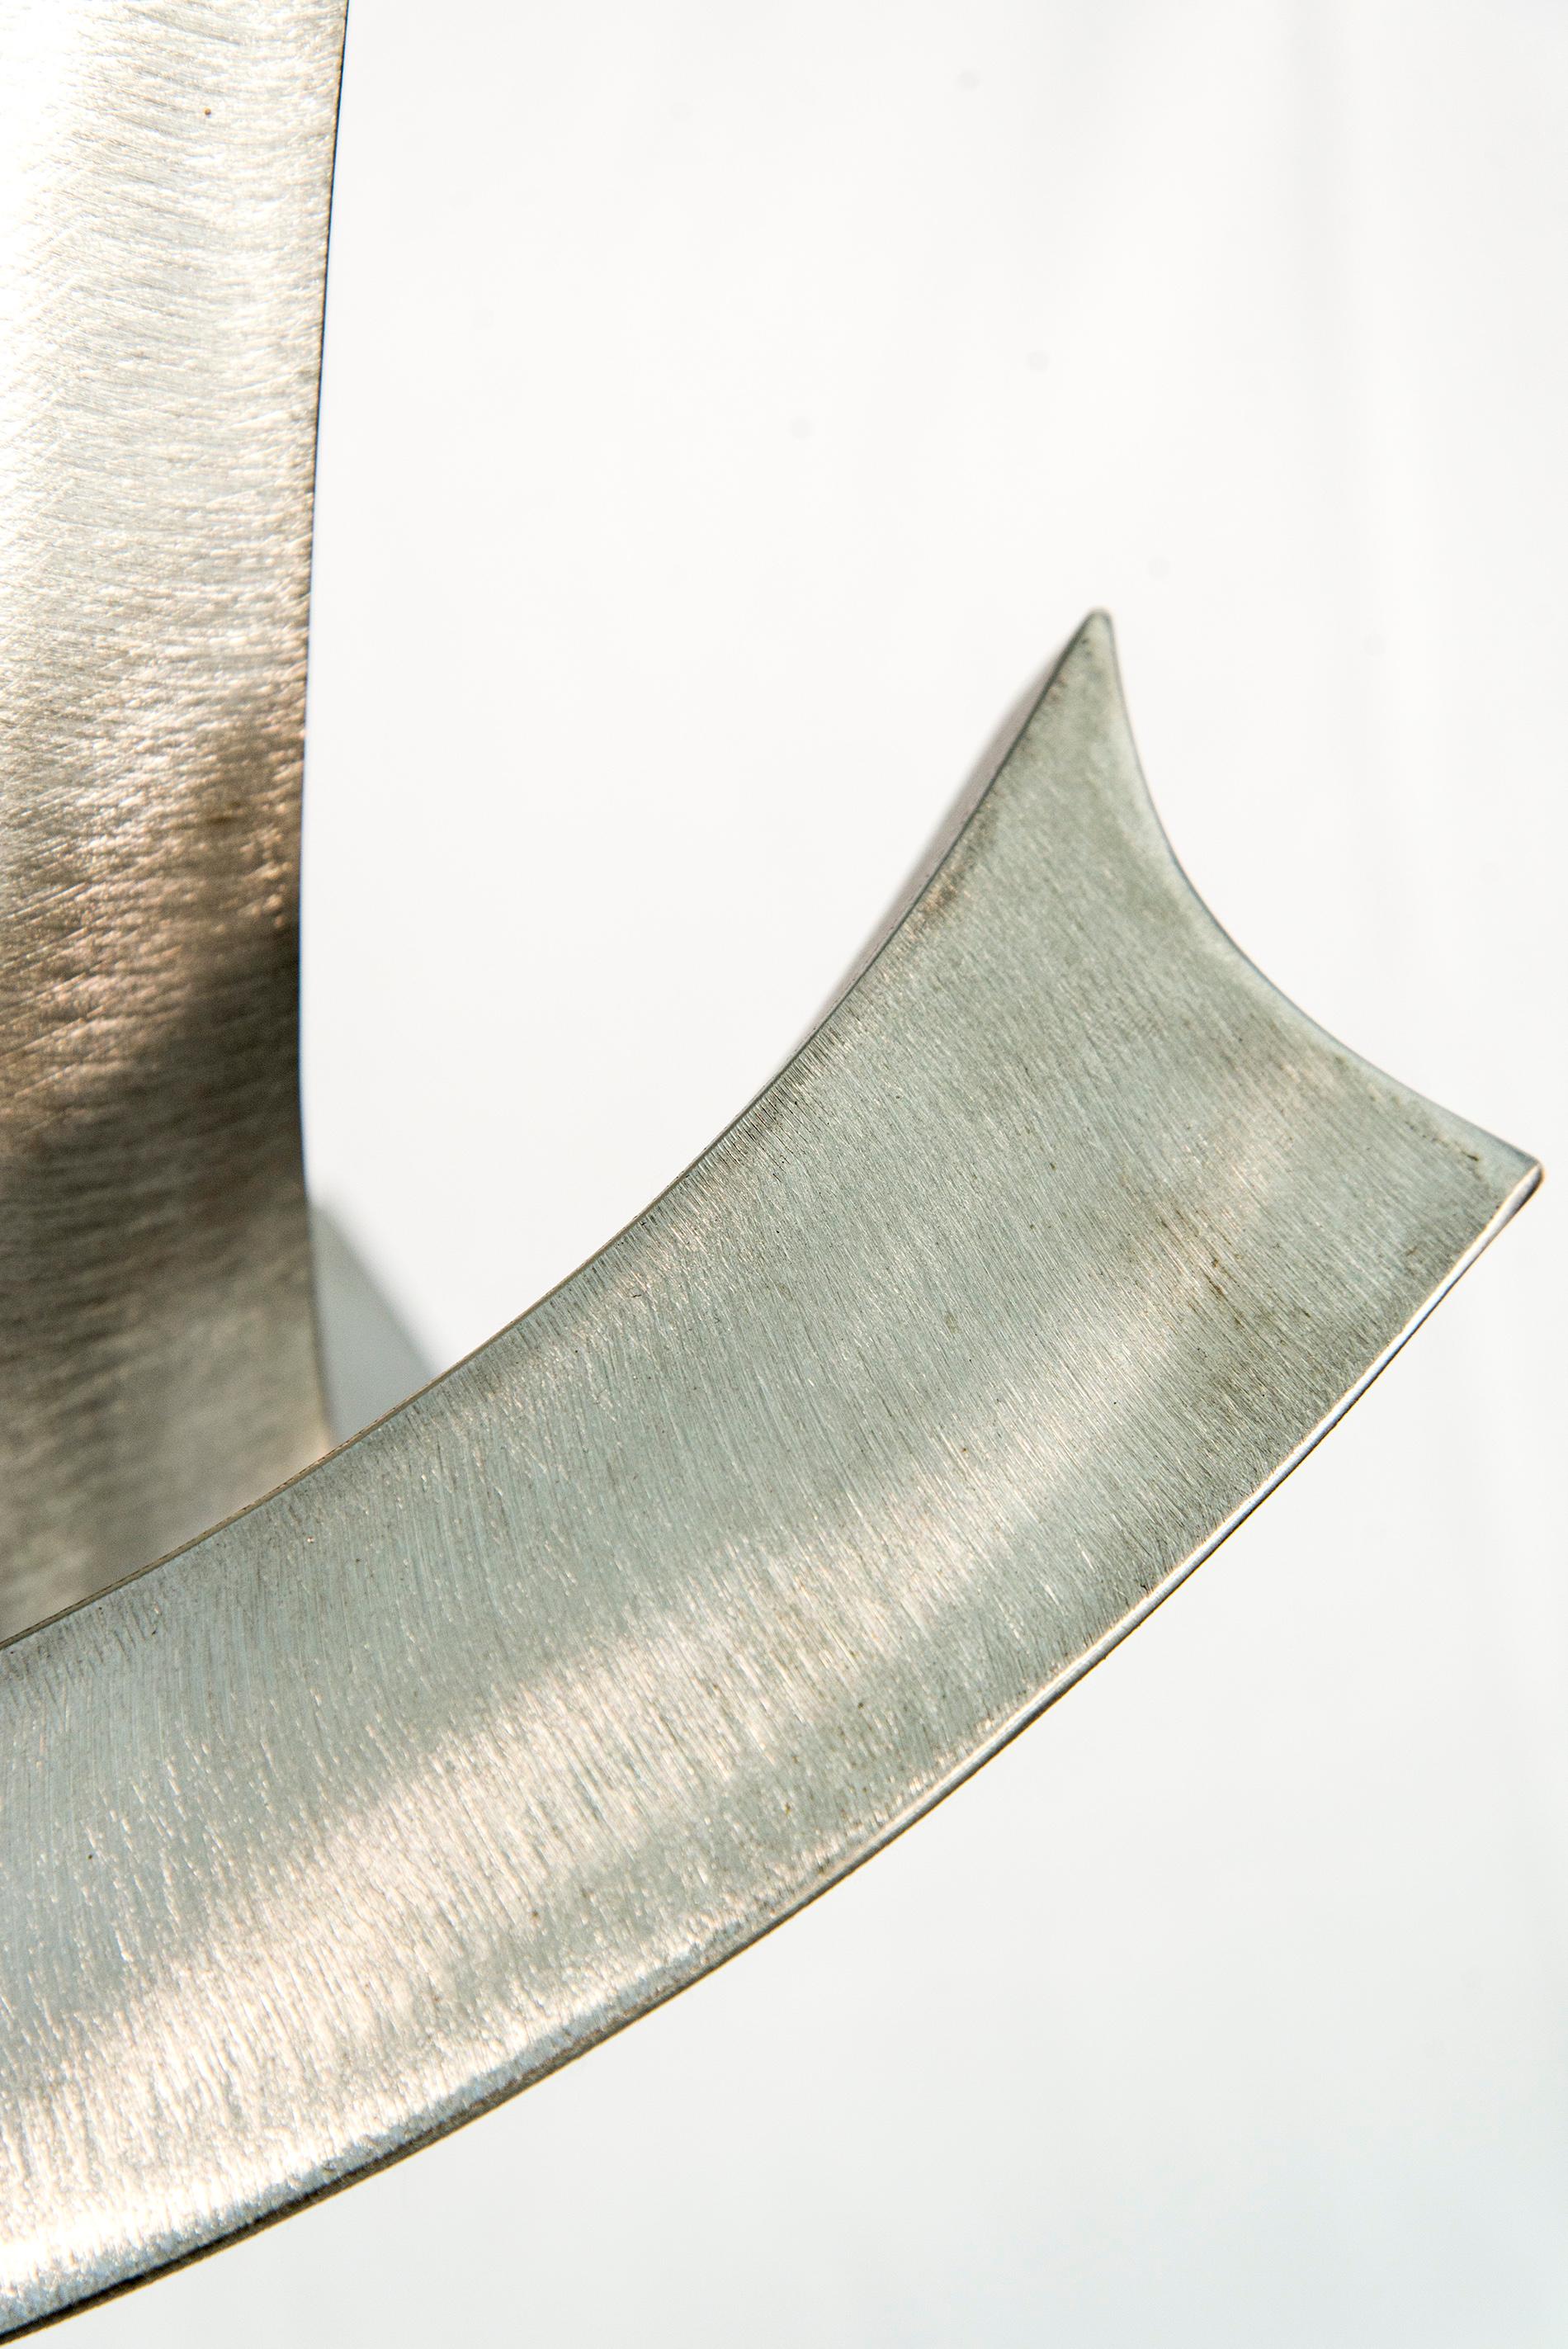 A Glimpse of Fun - contemporary, abstract, forged stainless steel sculpture - Gray Abstract Sculpture by Kevin Robb